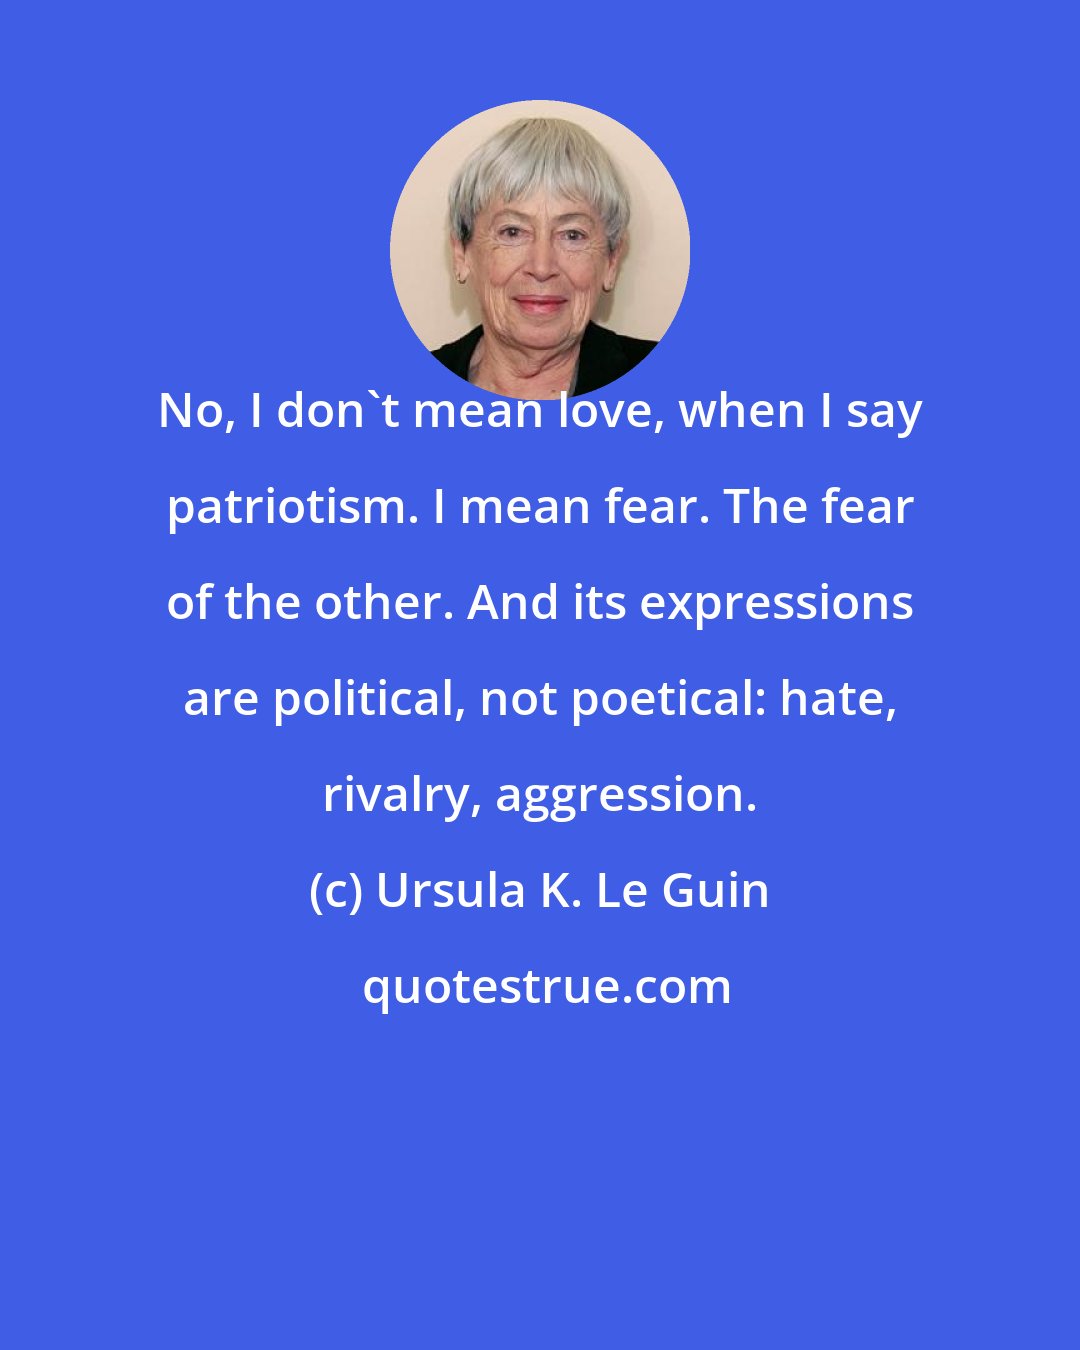 Ursula K. Le Guin: No, I don't mean love, when I say patriotism. I mean fear. The fear of the other. And its expressions are political, not poetical: hate, rivalry, aggression.